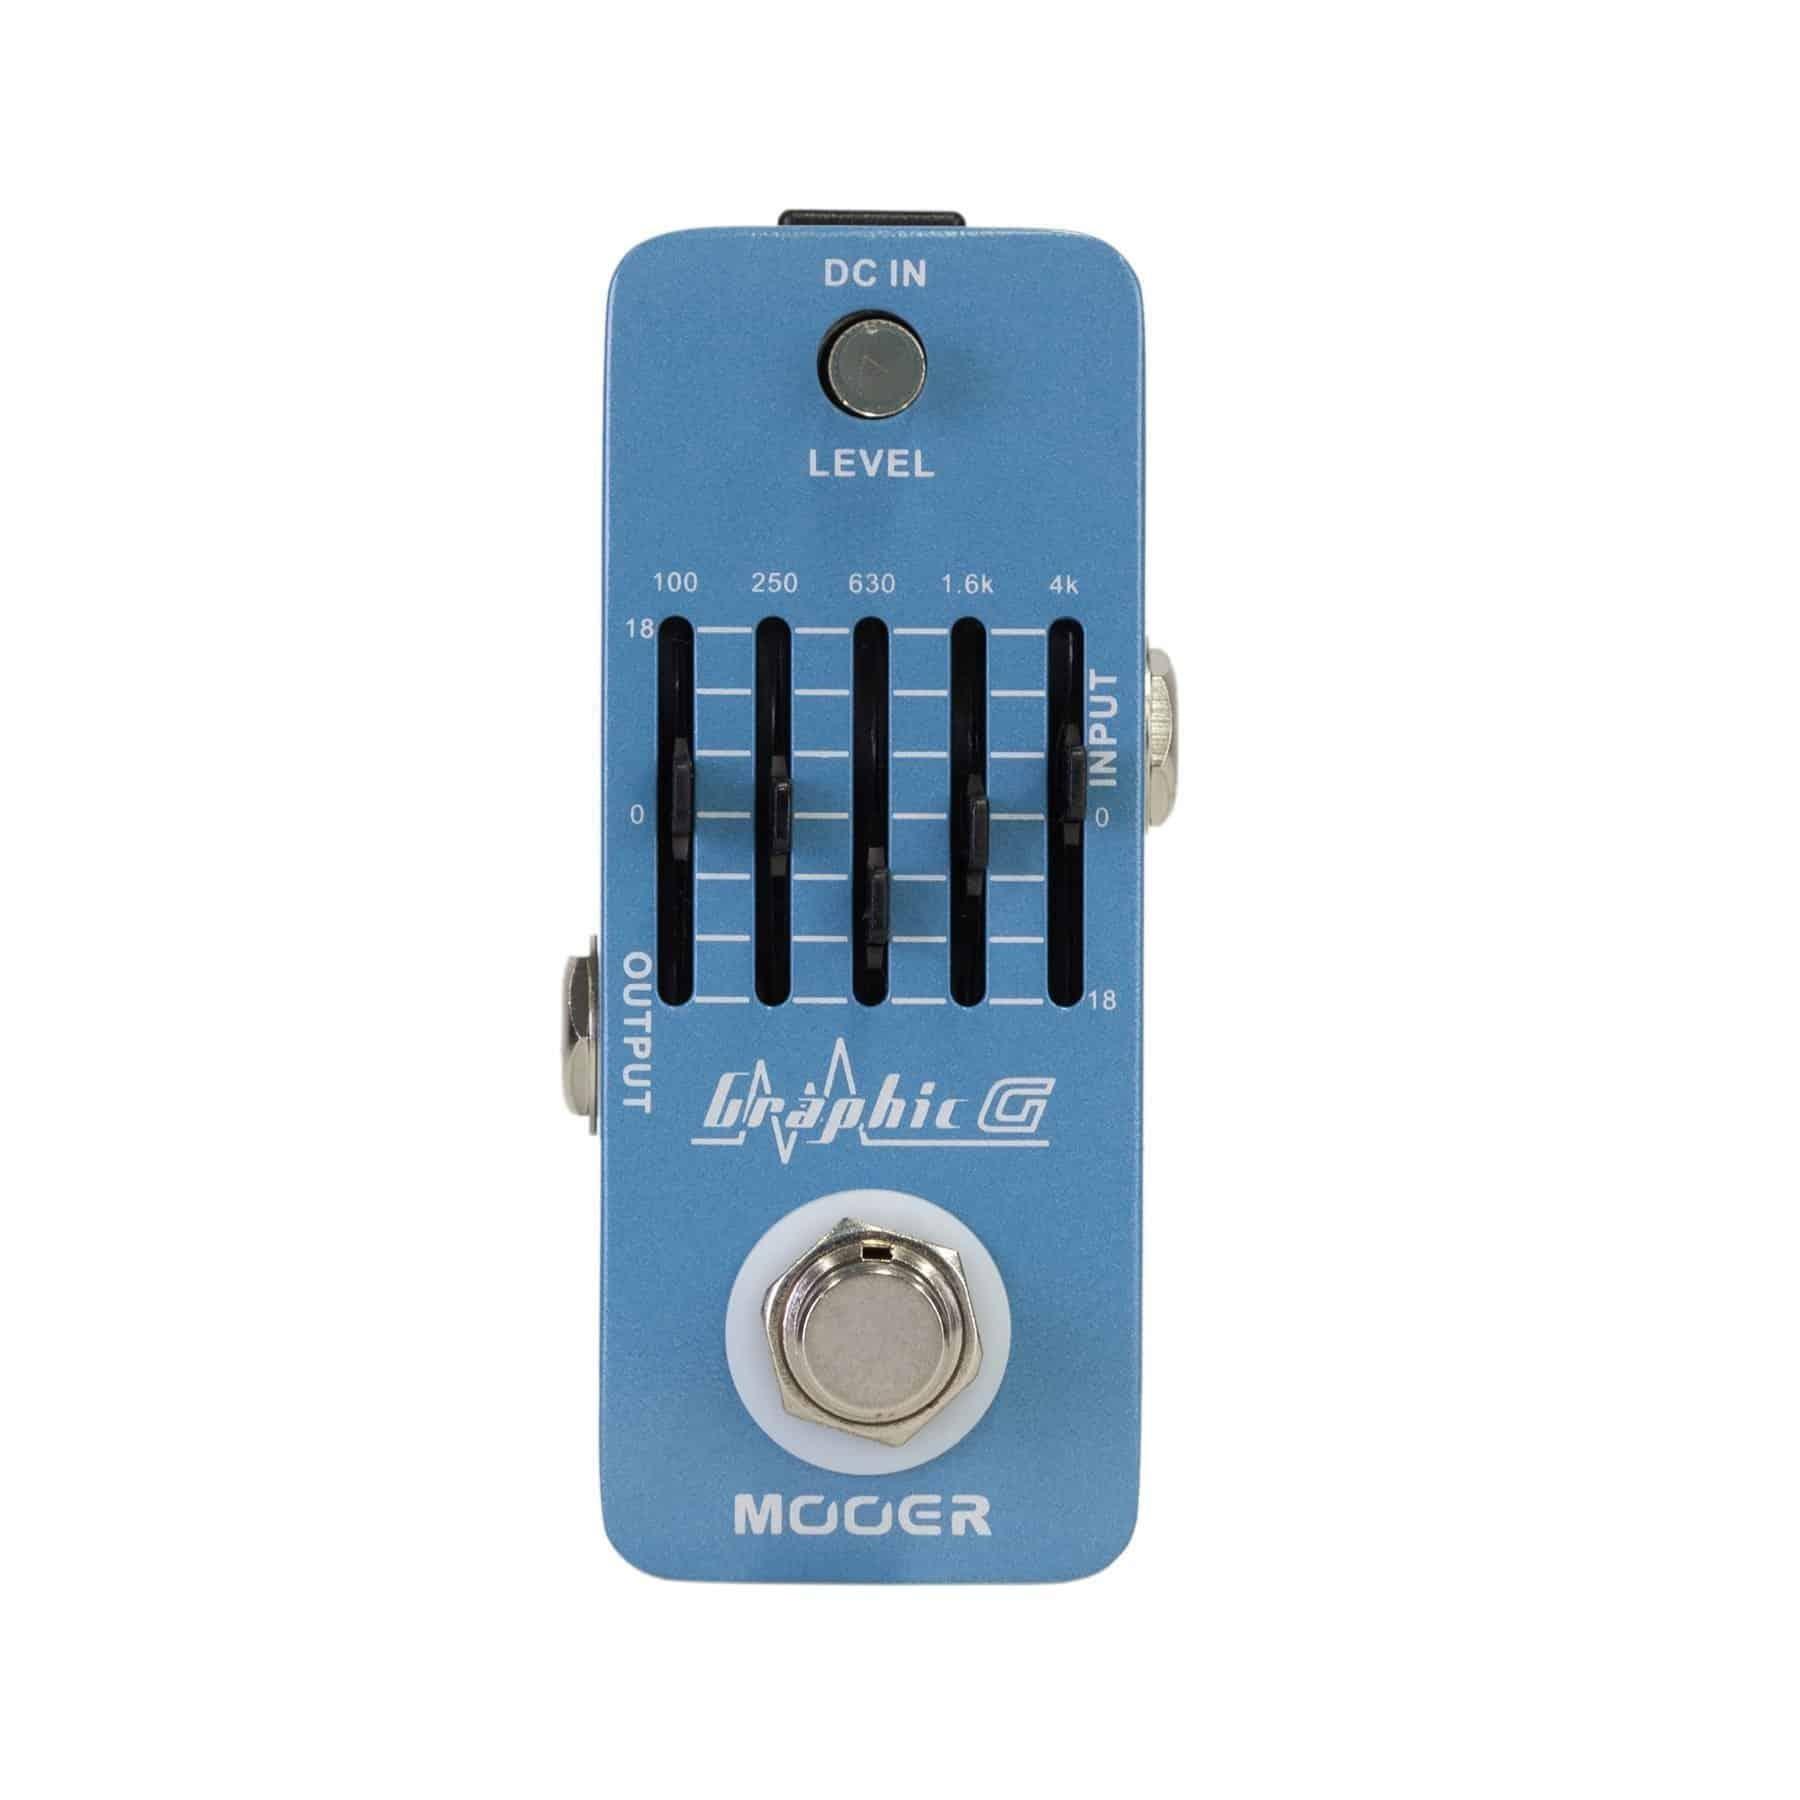 Mooer Graphic G EQ Micro Guitar Effects Pedal - Guitar - Effects Pedals by Mooer at Muso's Stuff